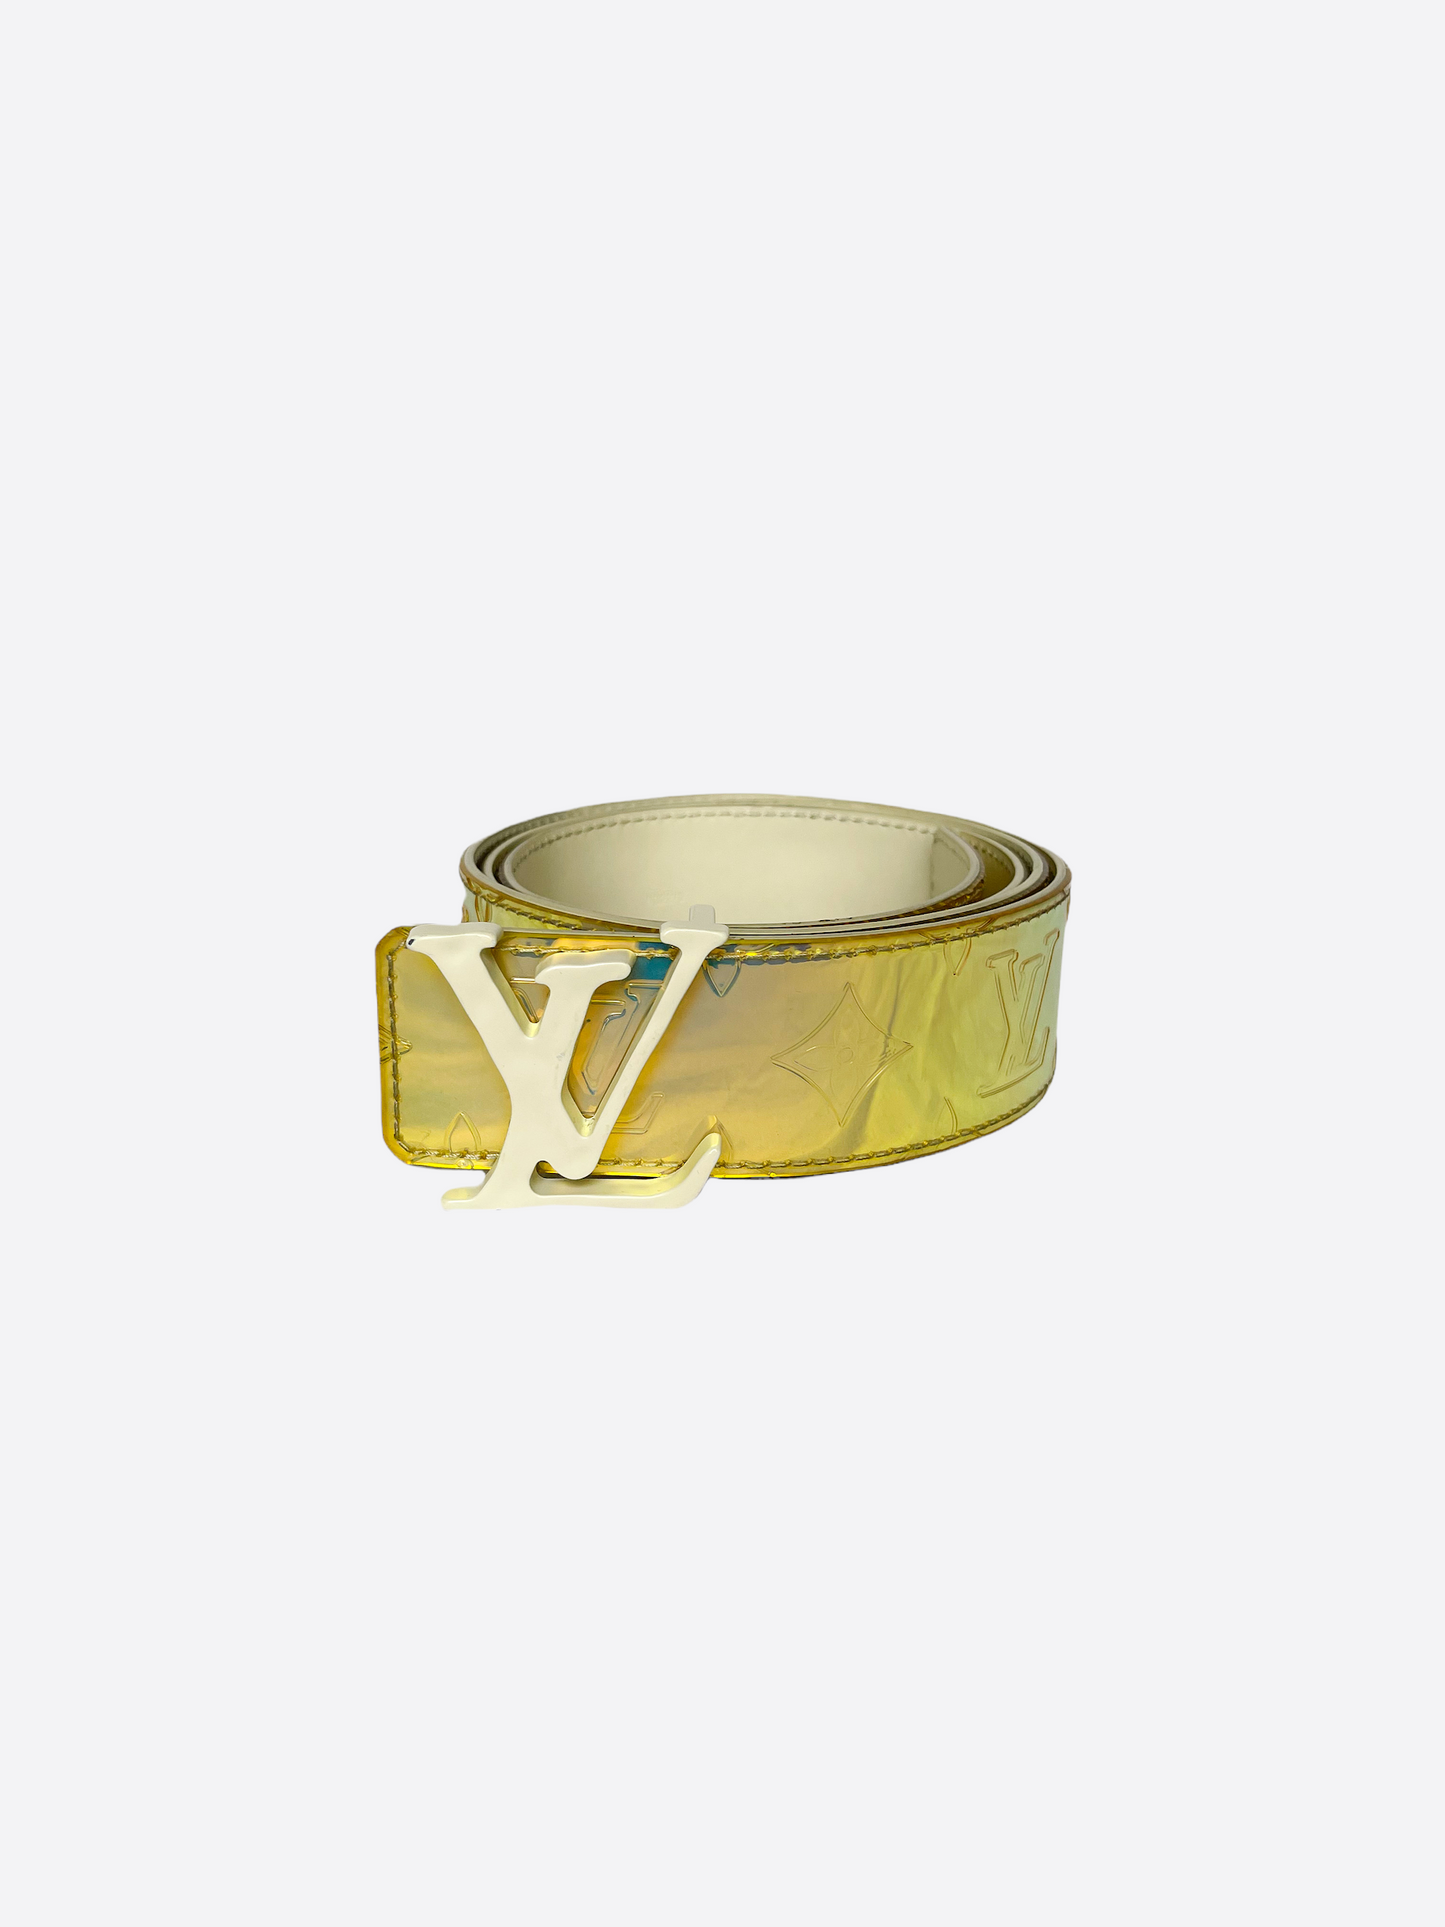 outfits to wear with monogram prism lv belt｜TikTok Search